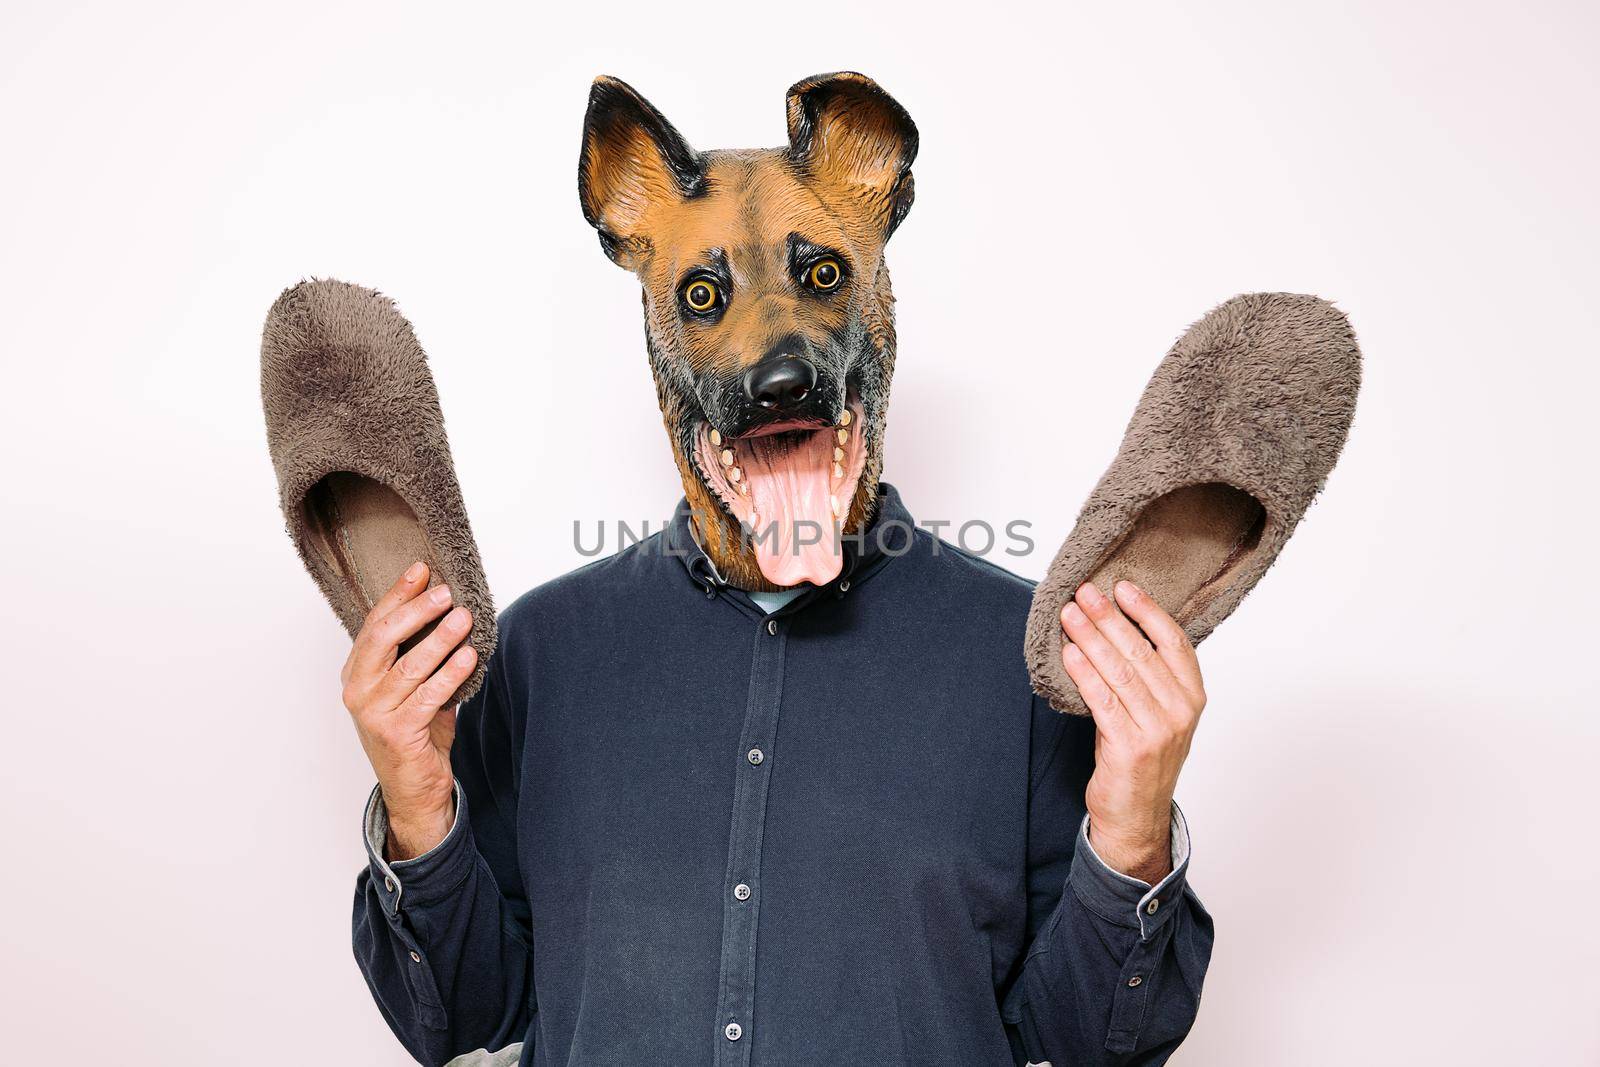 person with a dog mask shows a pair of slippers on white background, concept of relaxation and home lifestyle with pets